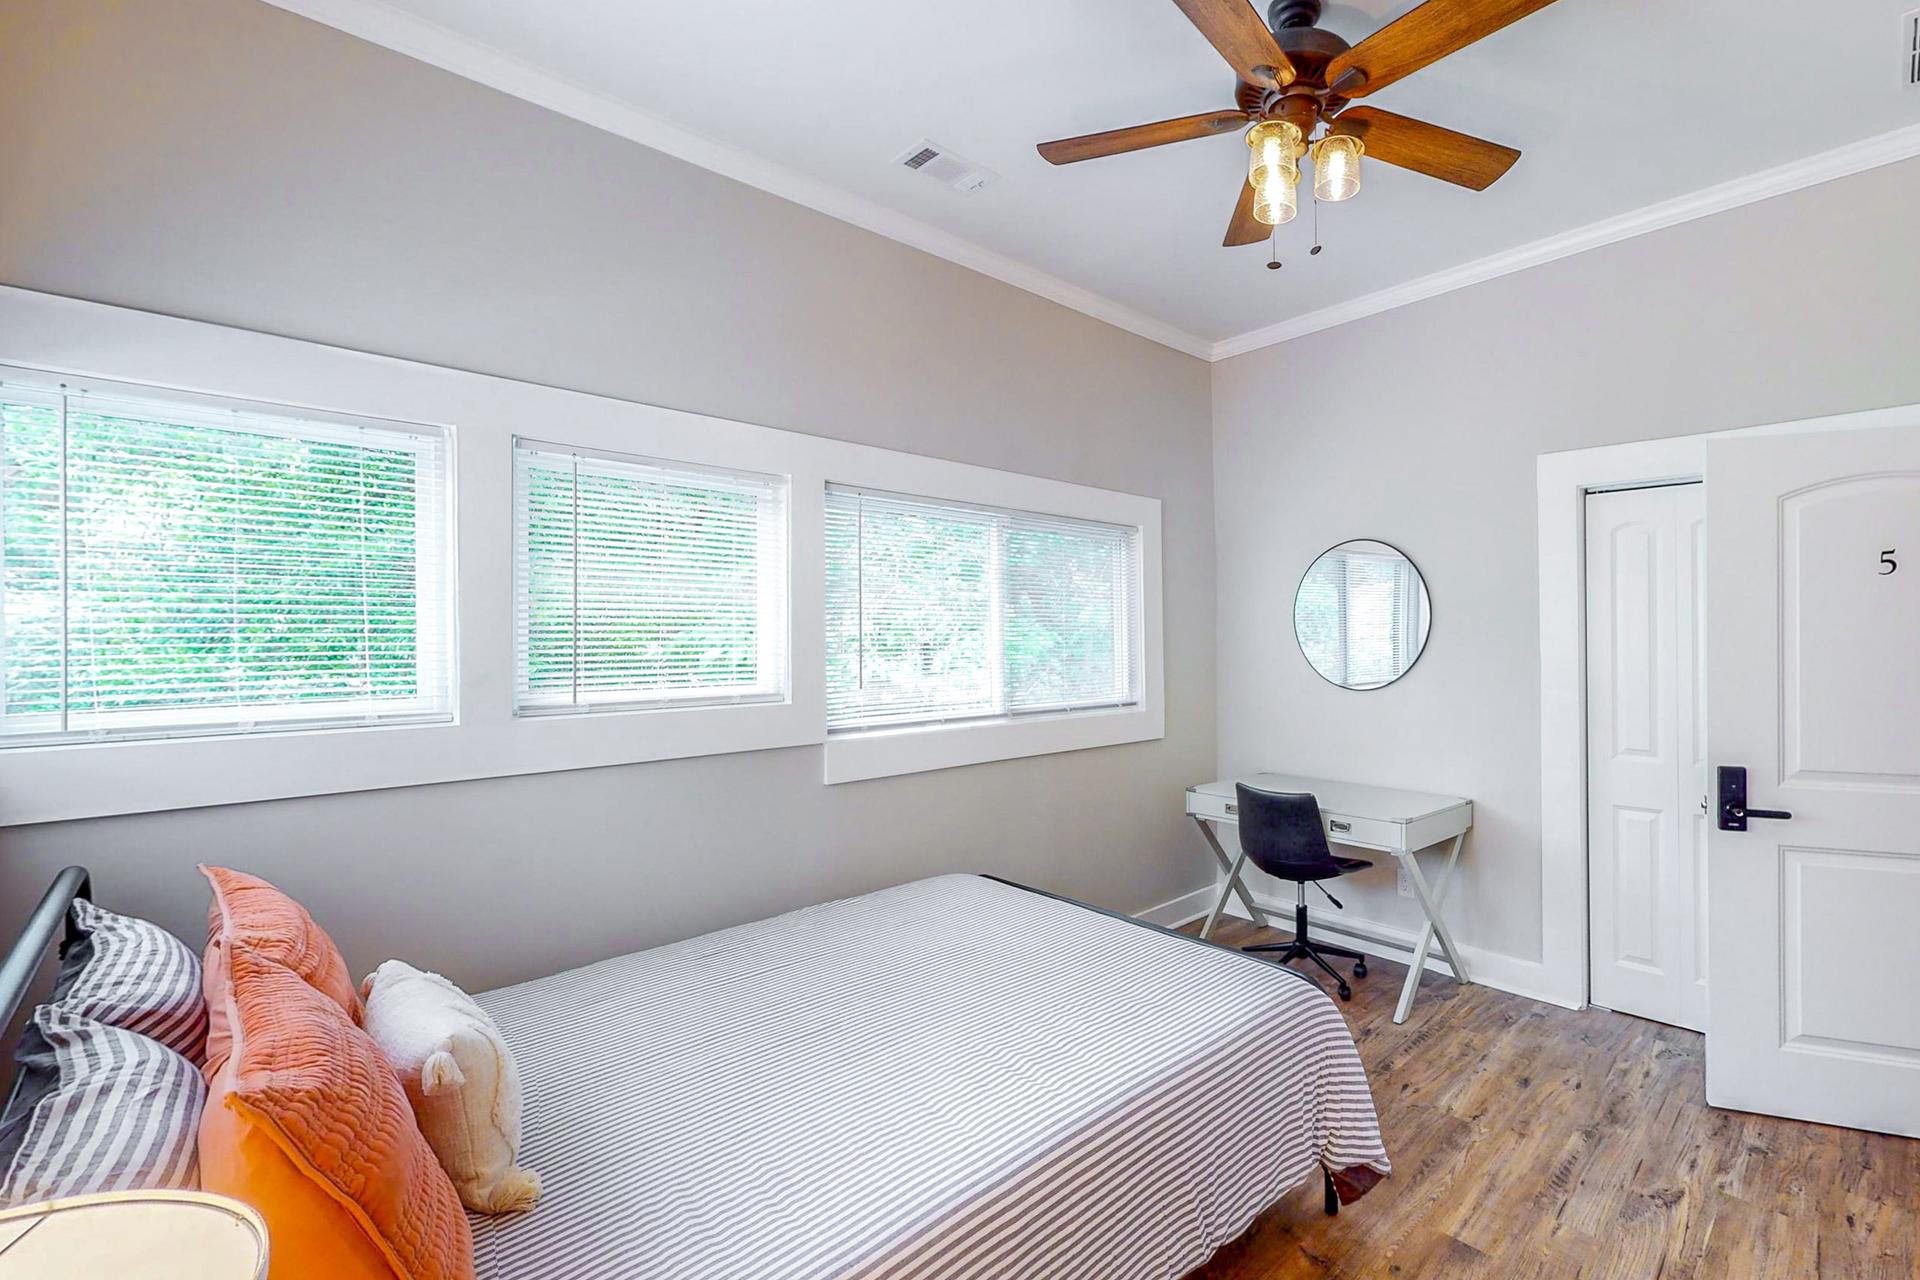 Comfortable and quiet bedroom with ceiling fan